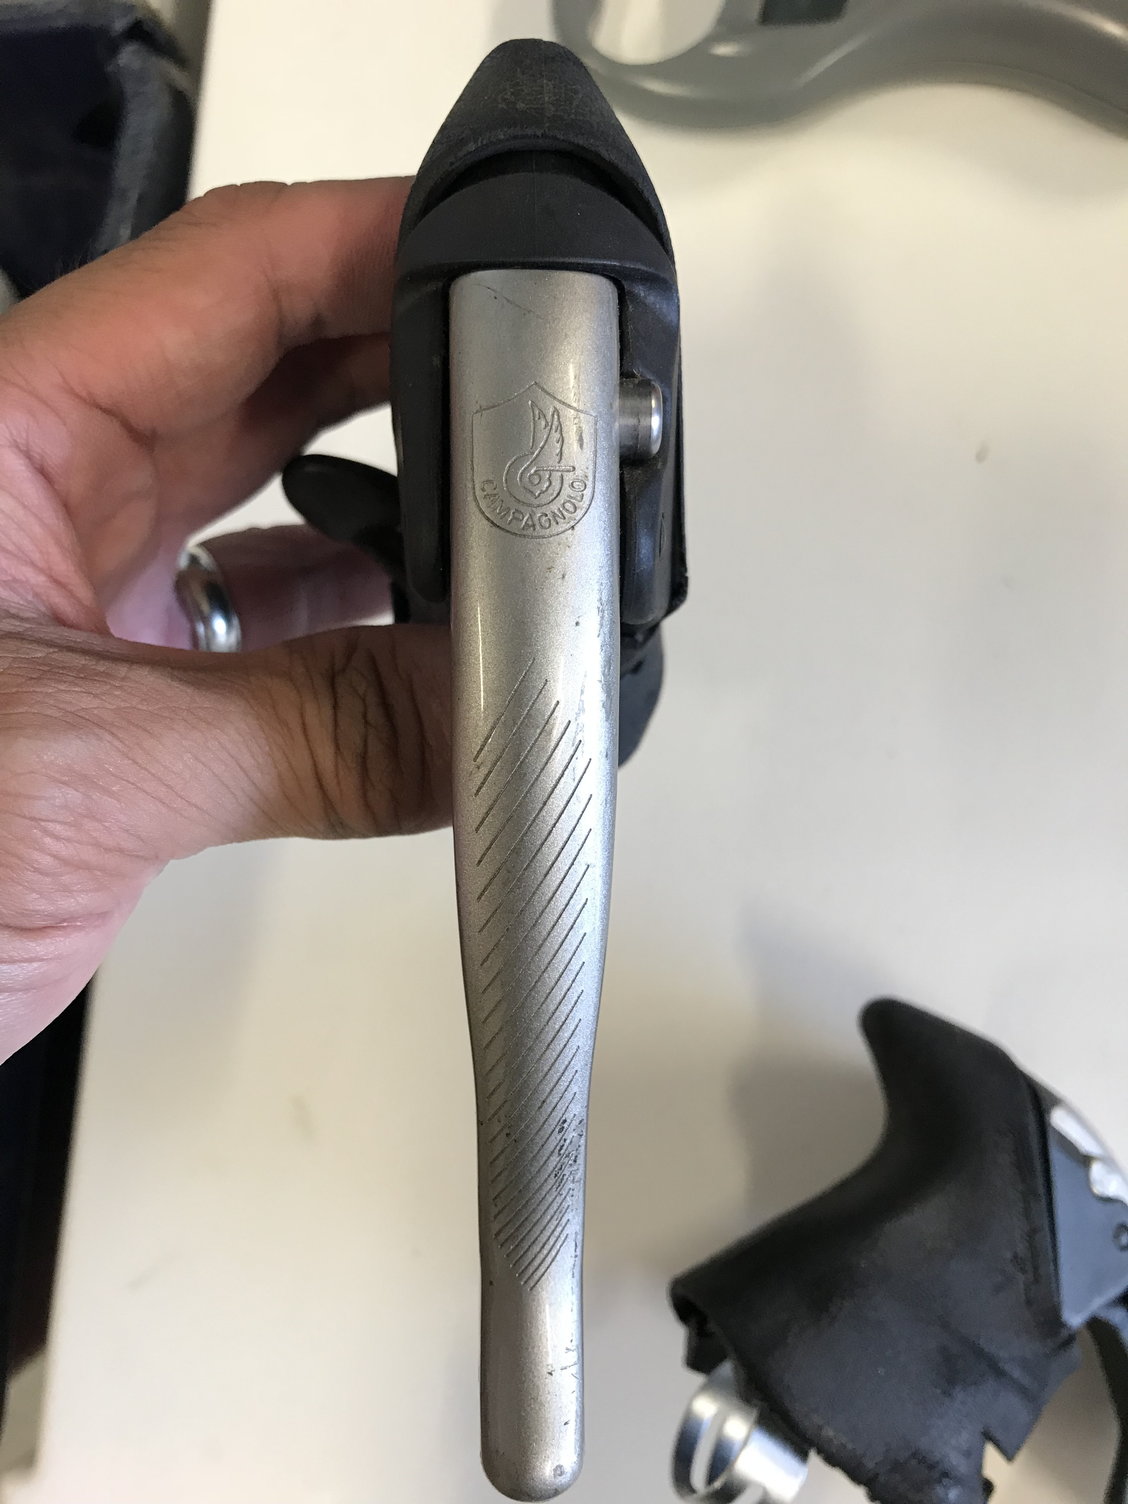 Campagnolo 8 speed Ergo shifter identification and worth - Bike